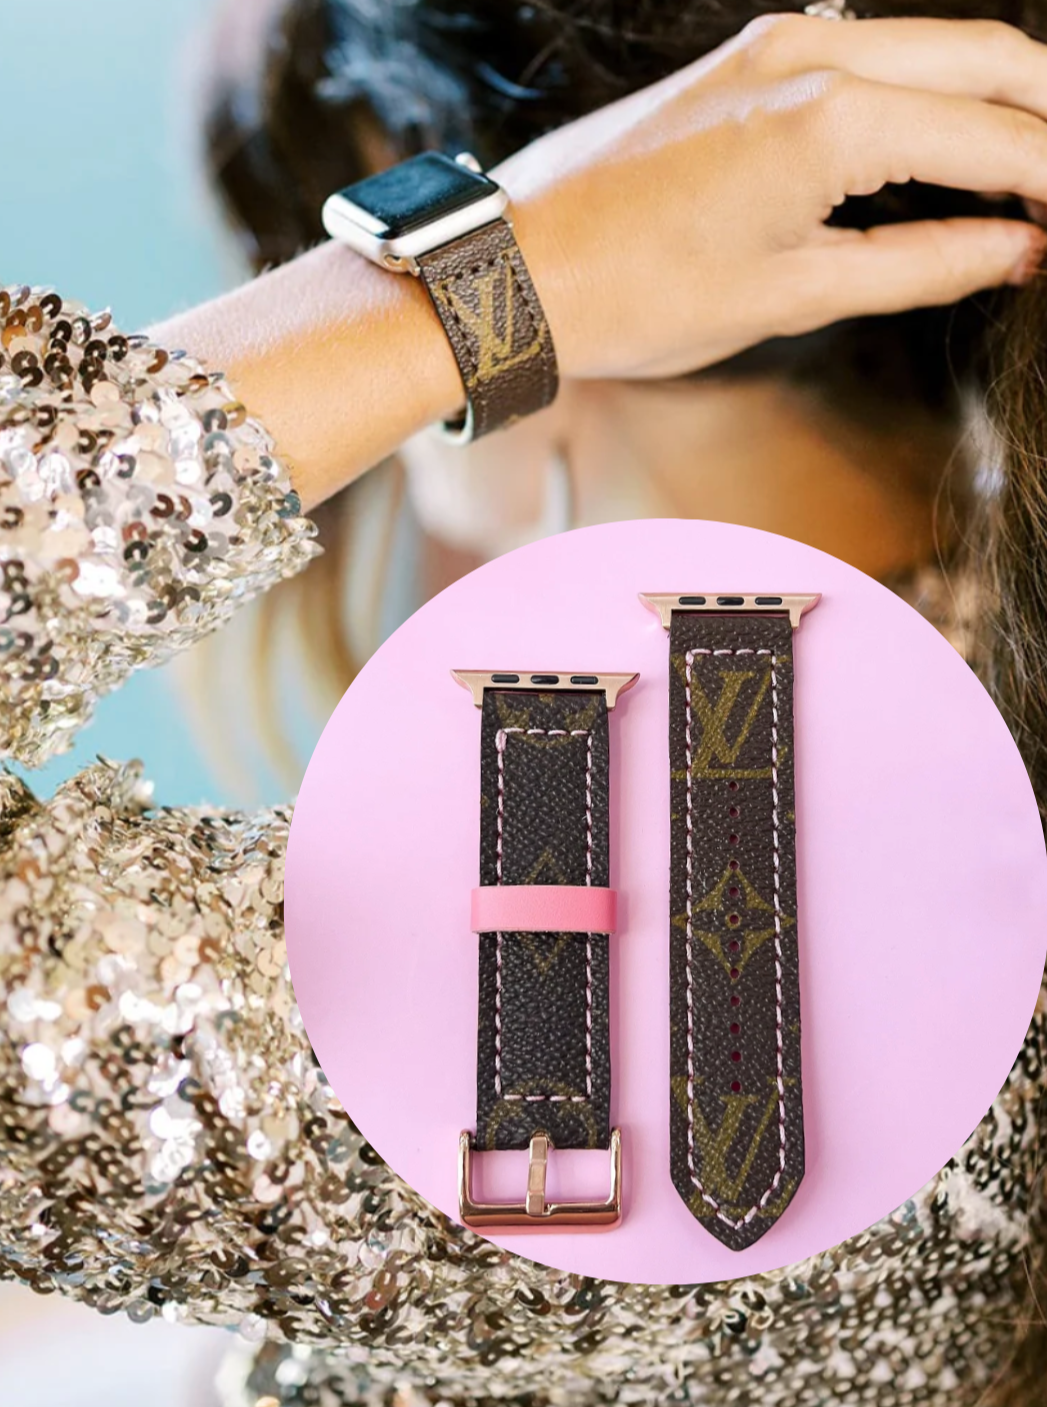 LOUIS VUITTON BAND - Apple Watch Band Review by SPARK'L BANDS